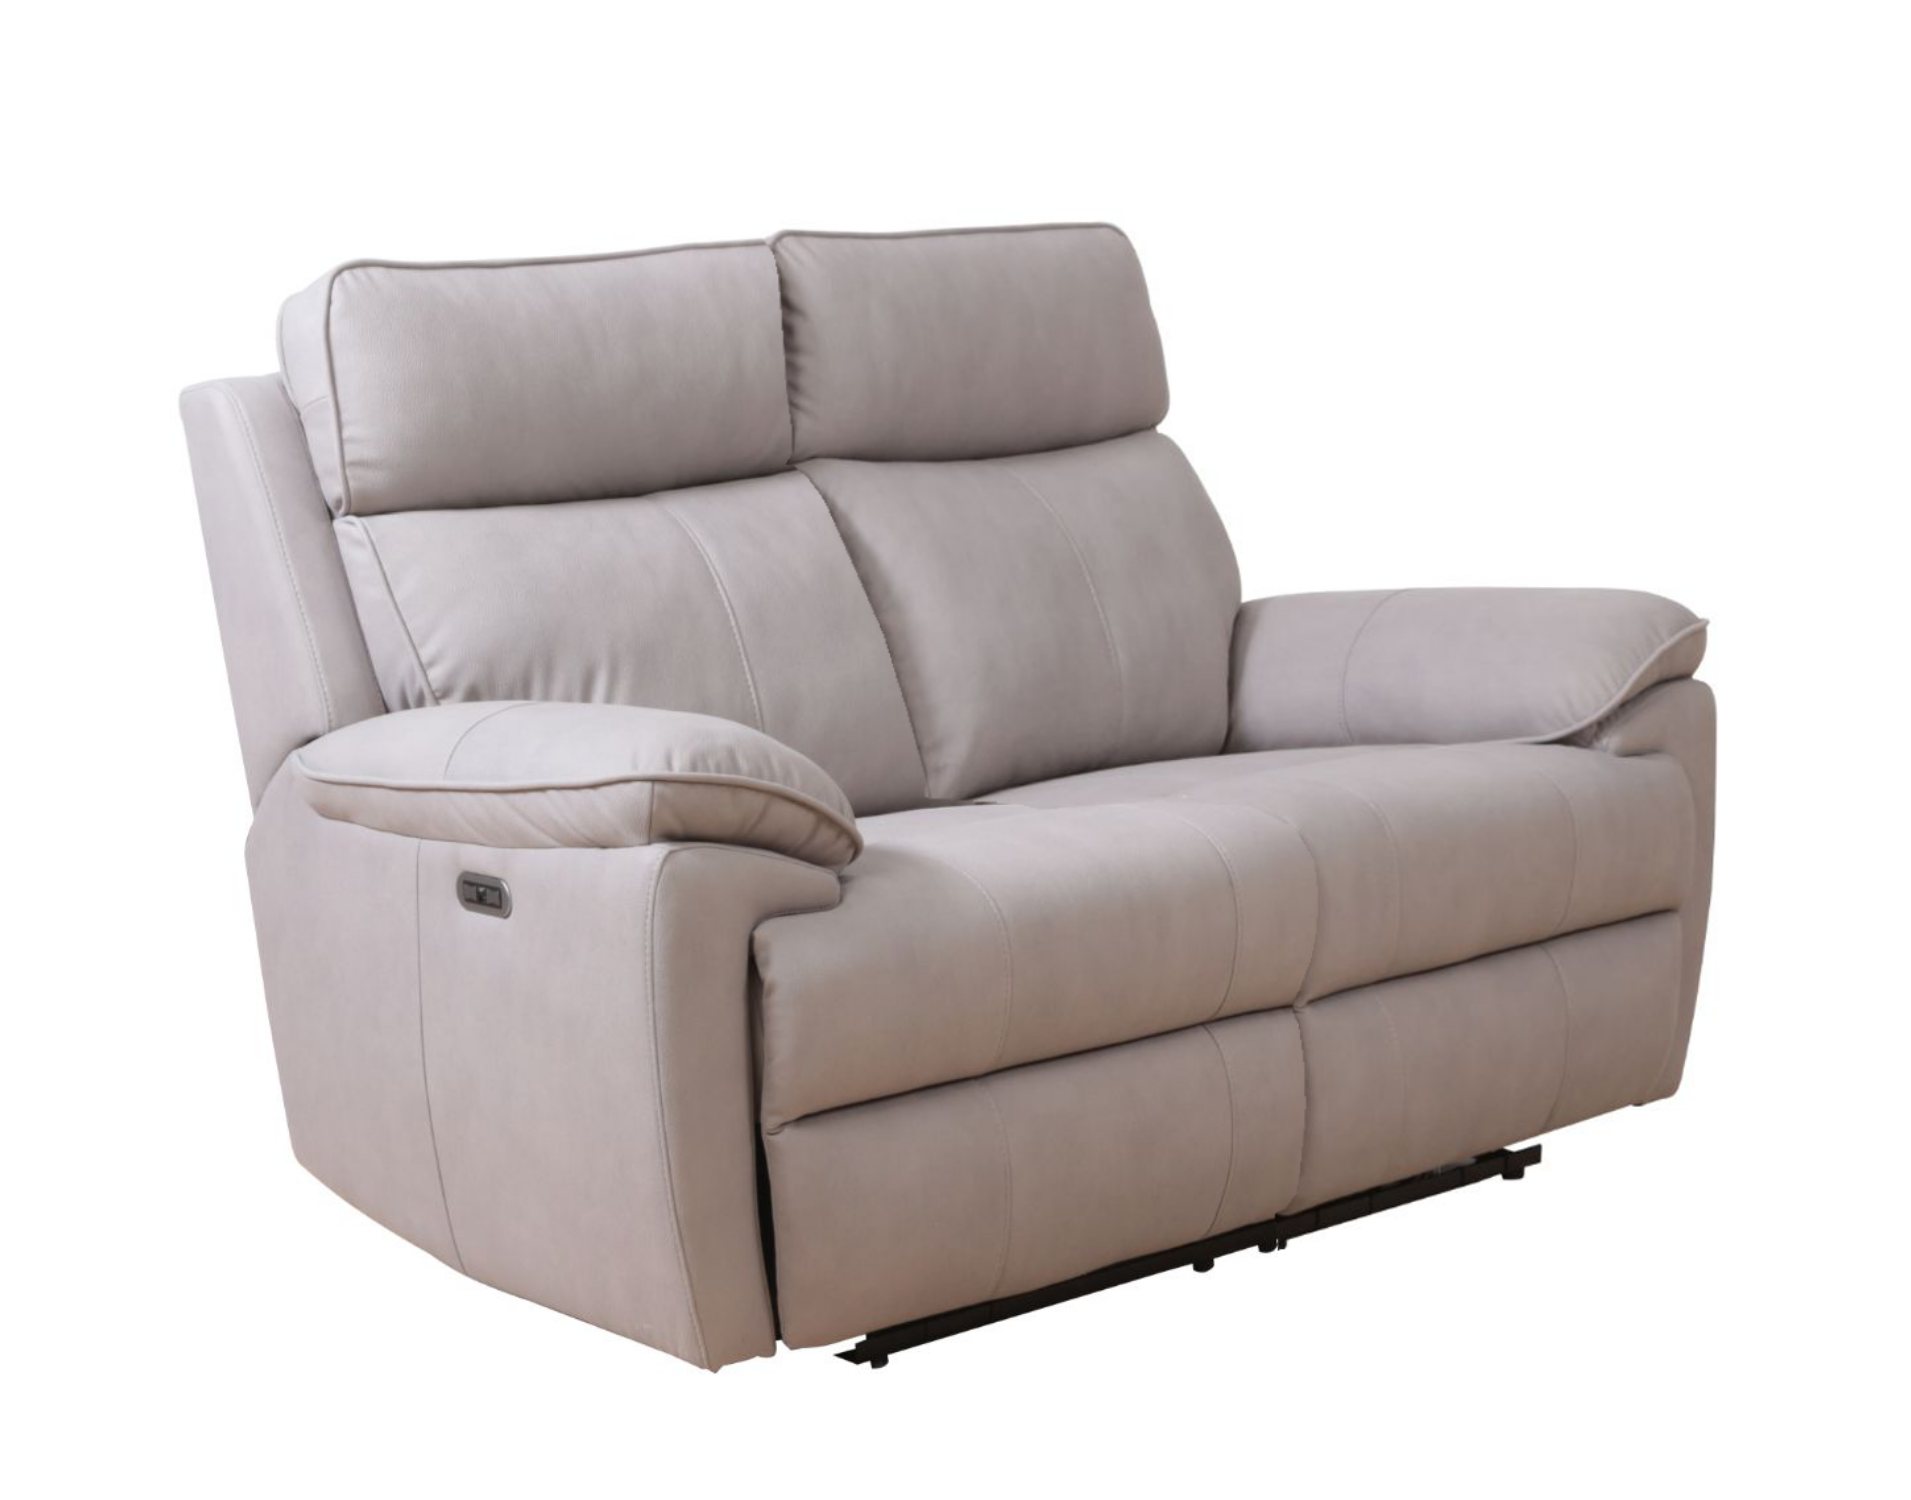 double recliner sofa bed sectional couch